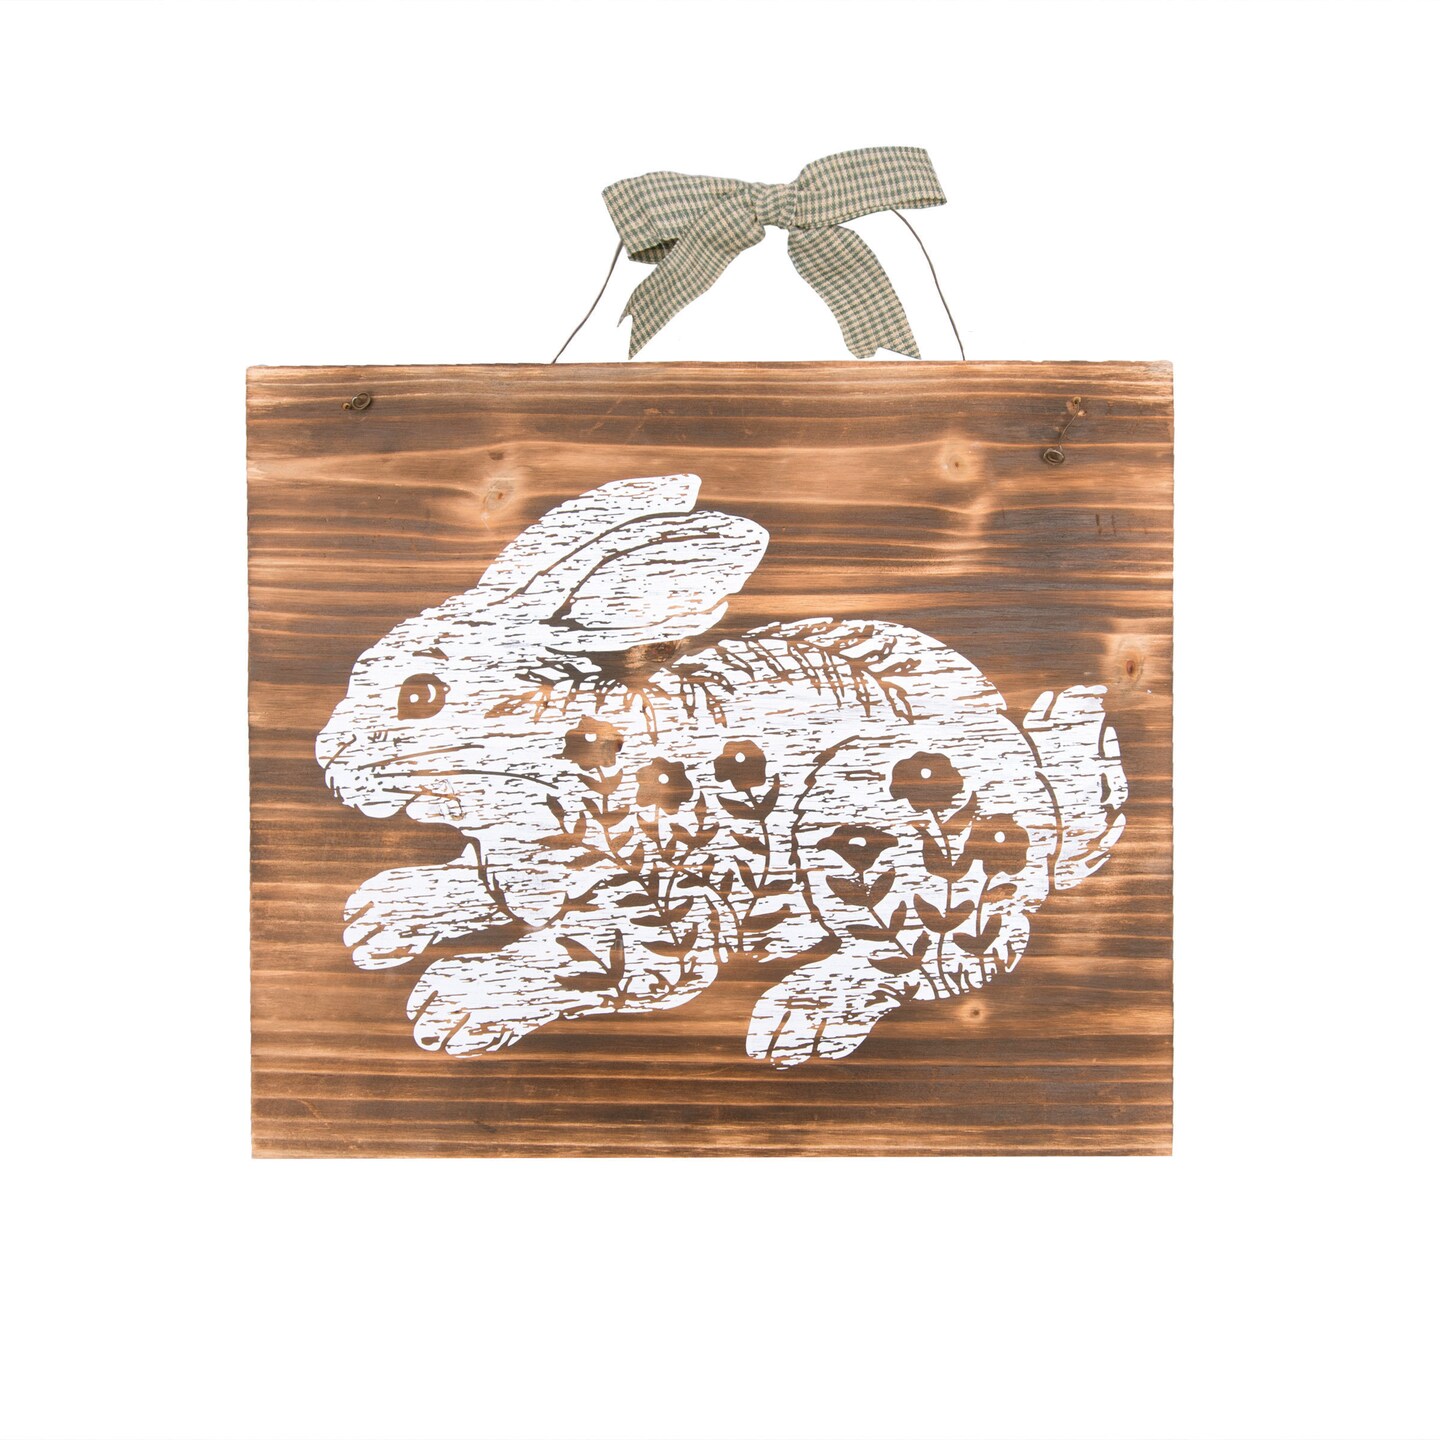 Etched Farmhouse Bunny Rabbit Wood Easter Wall Art Decor